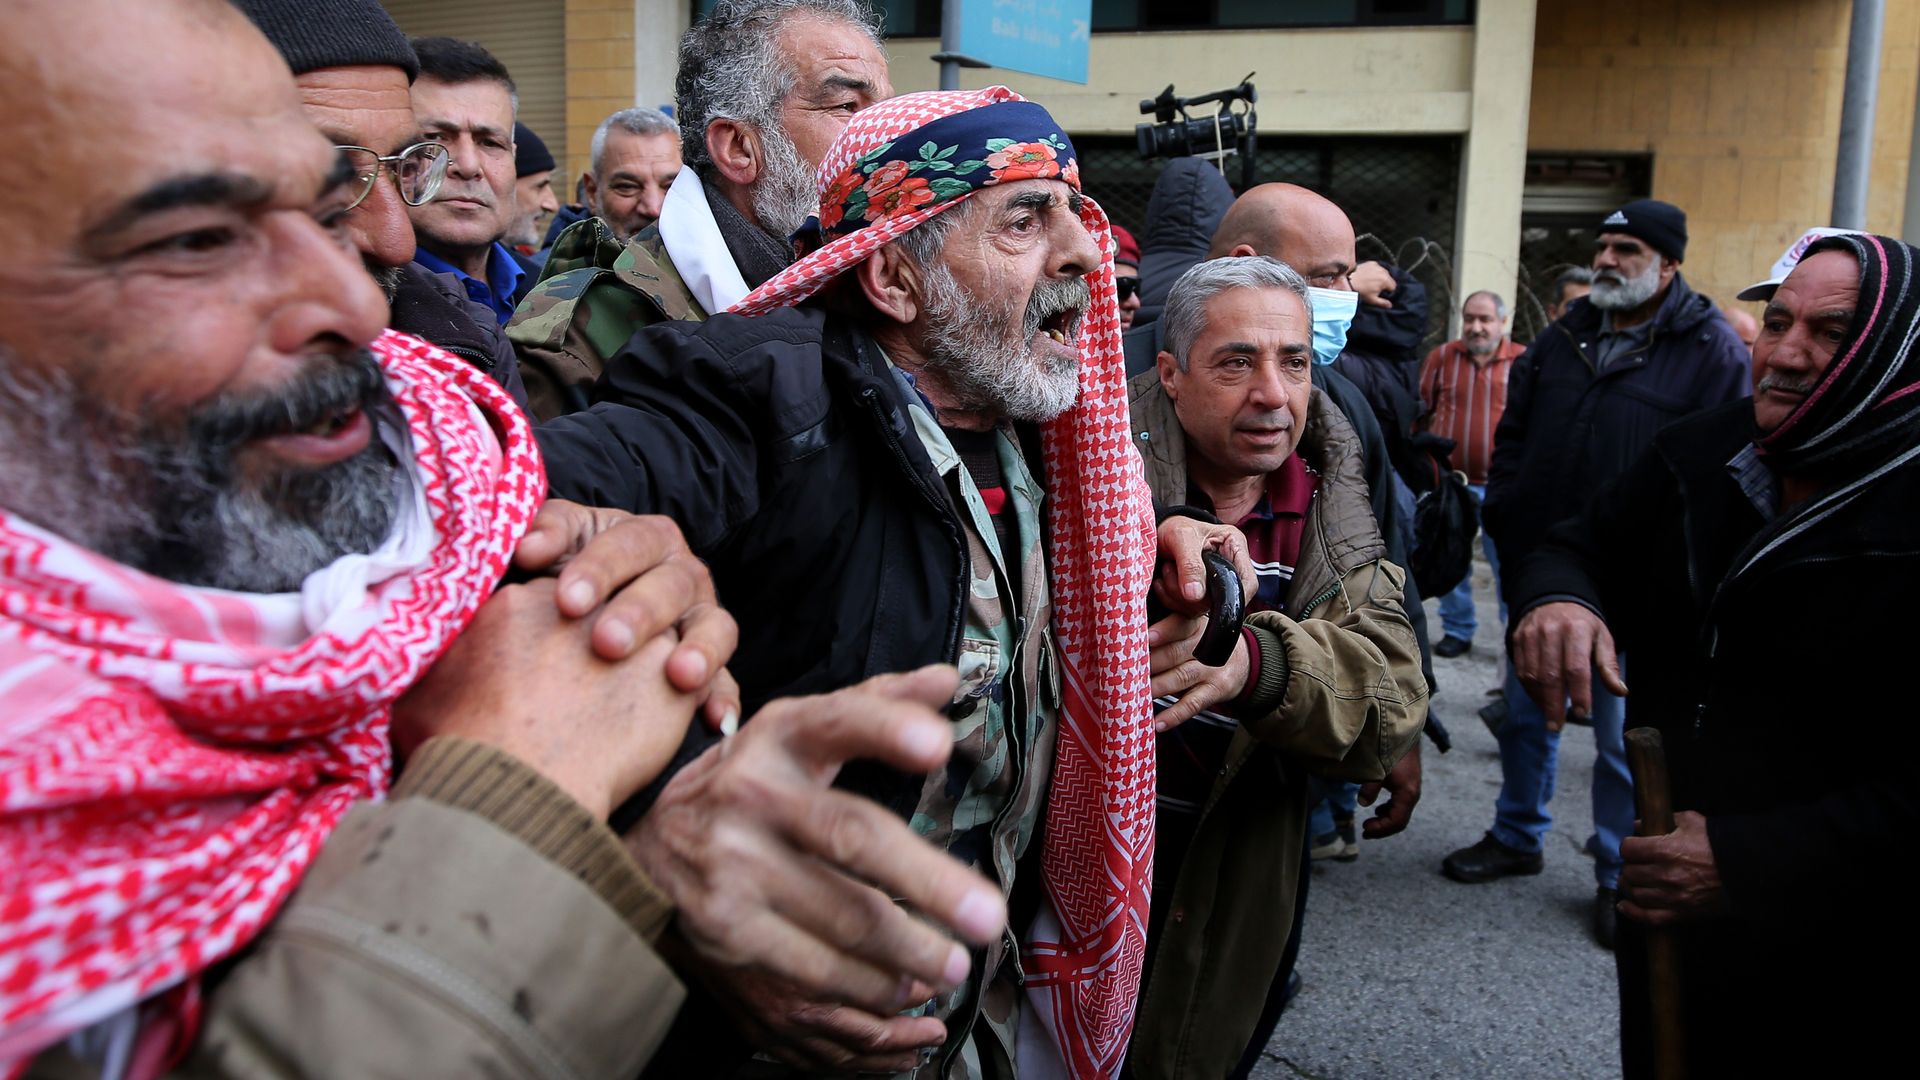 Lebanese army retirees protest living conditions and economic crisis on March 30. Photo: Marwan Naamani/picture alliance via Getty Images